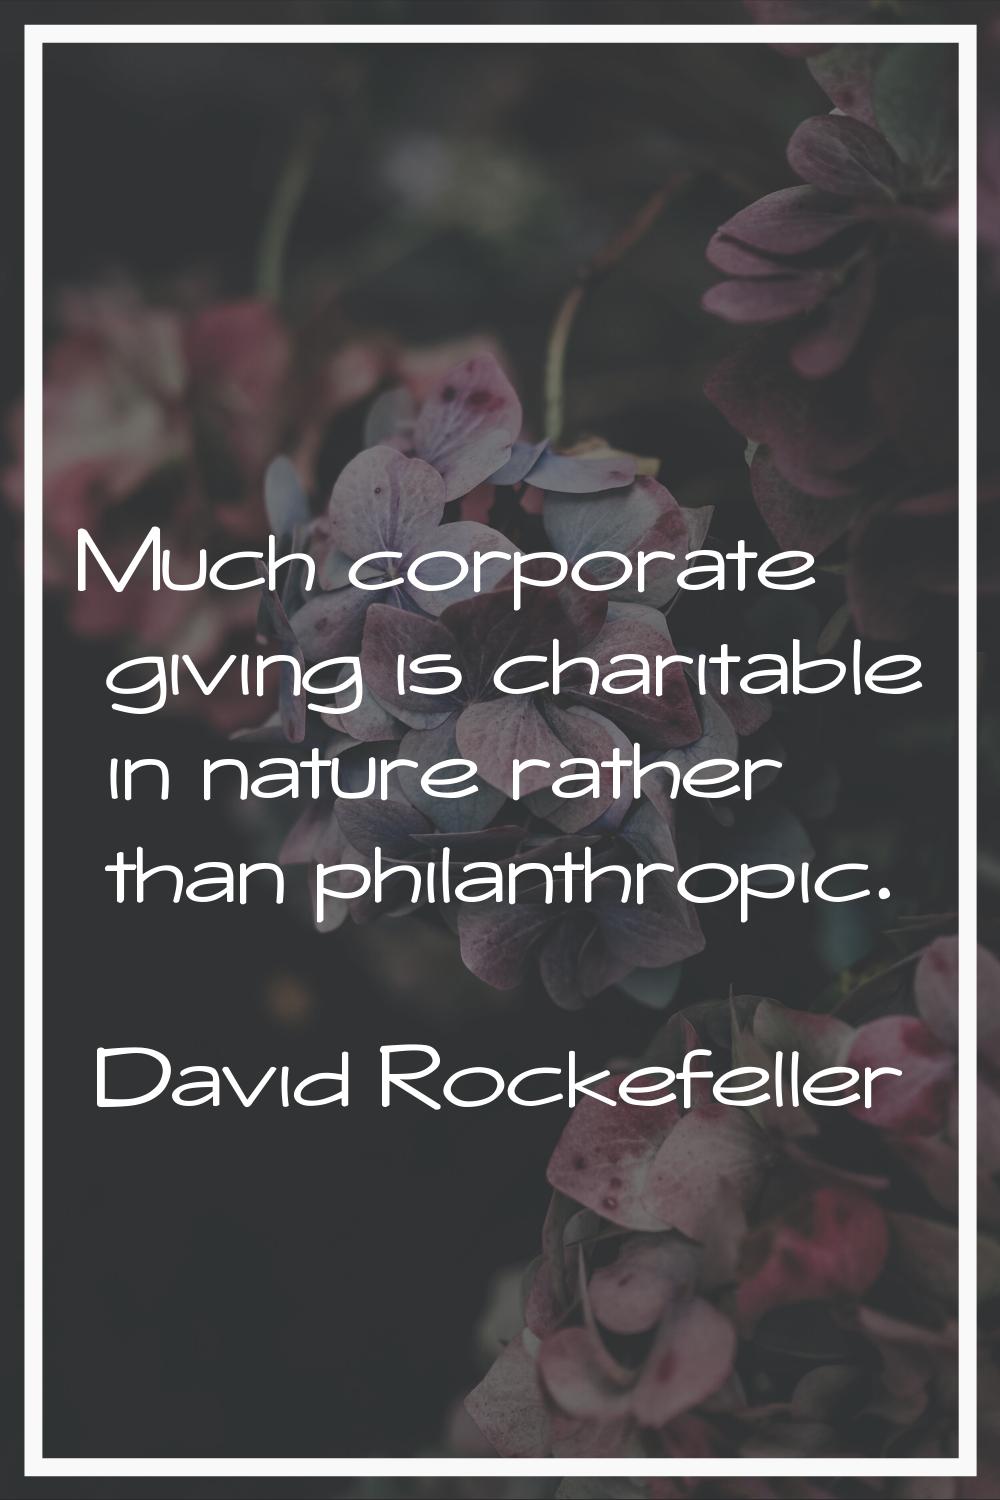 Much corporate giving is charitable in nature rather than philanthropic.